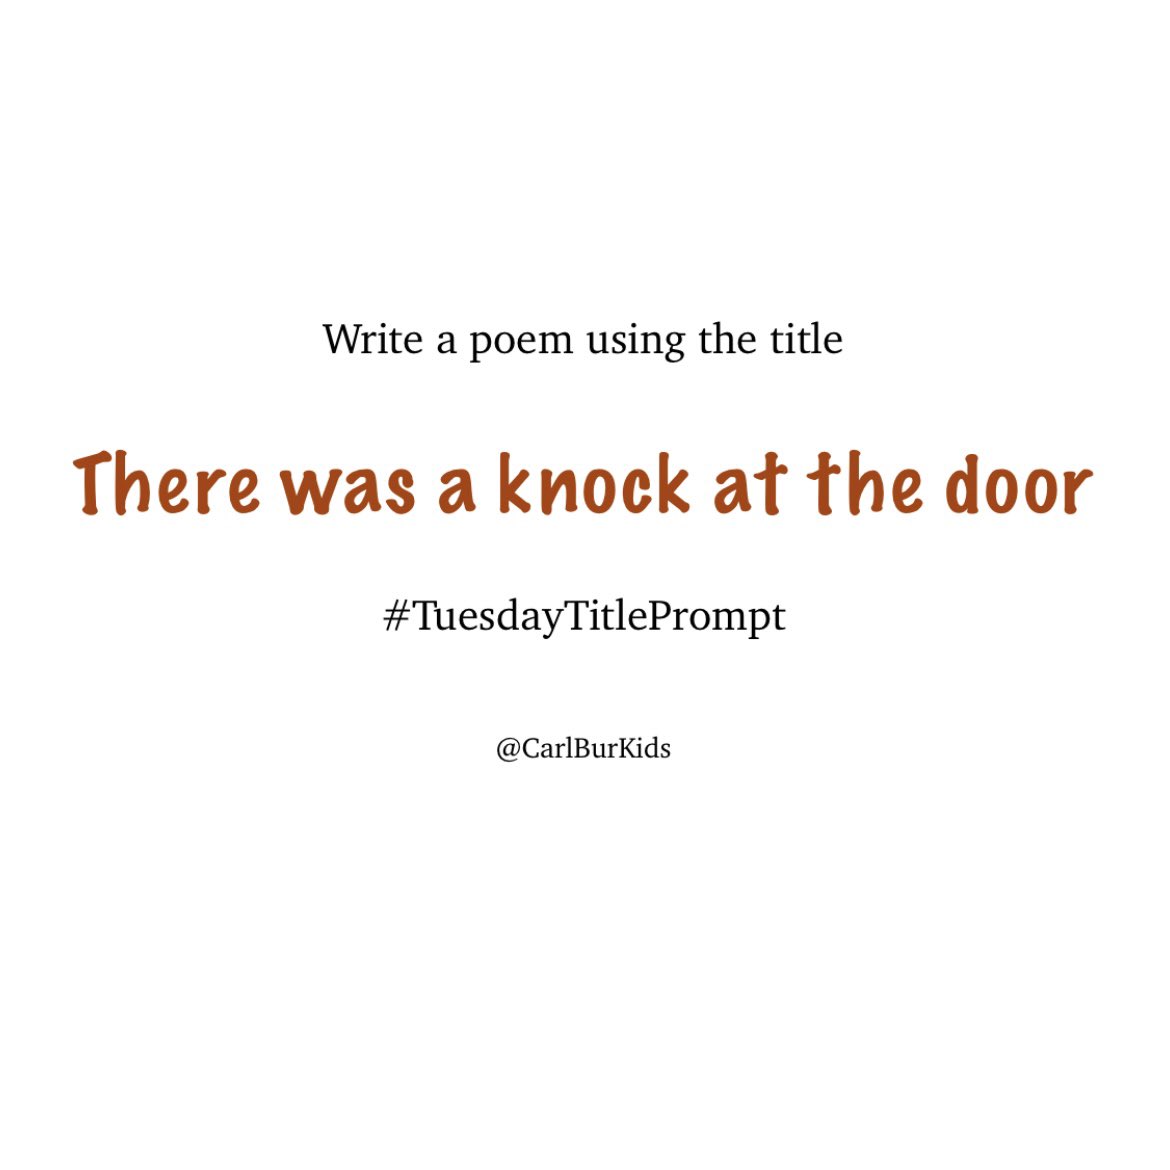 There was a knock at the door. What happened next? Let us know in this week’s #TuesdayTitlePrompt.